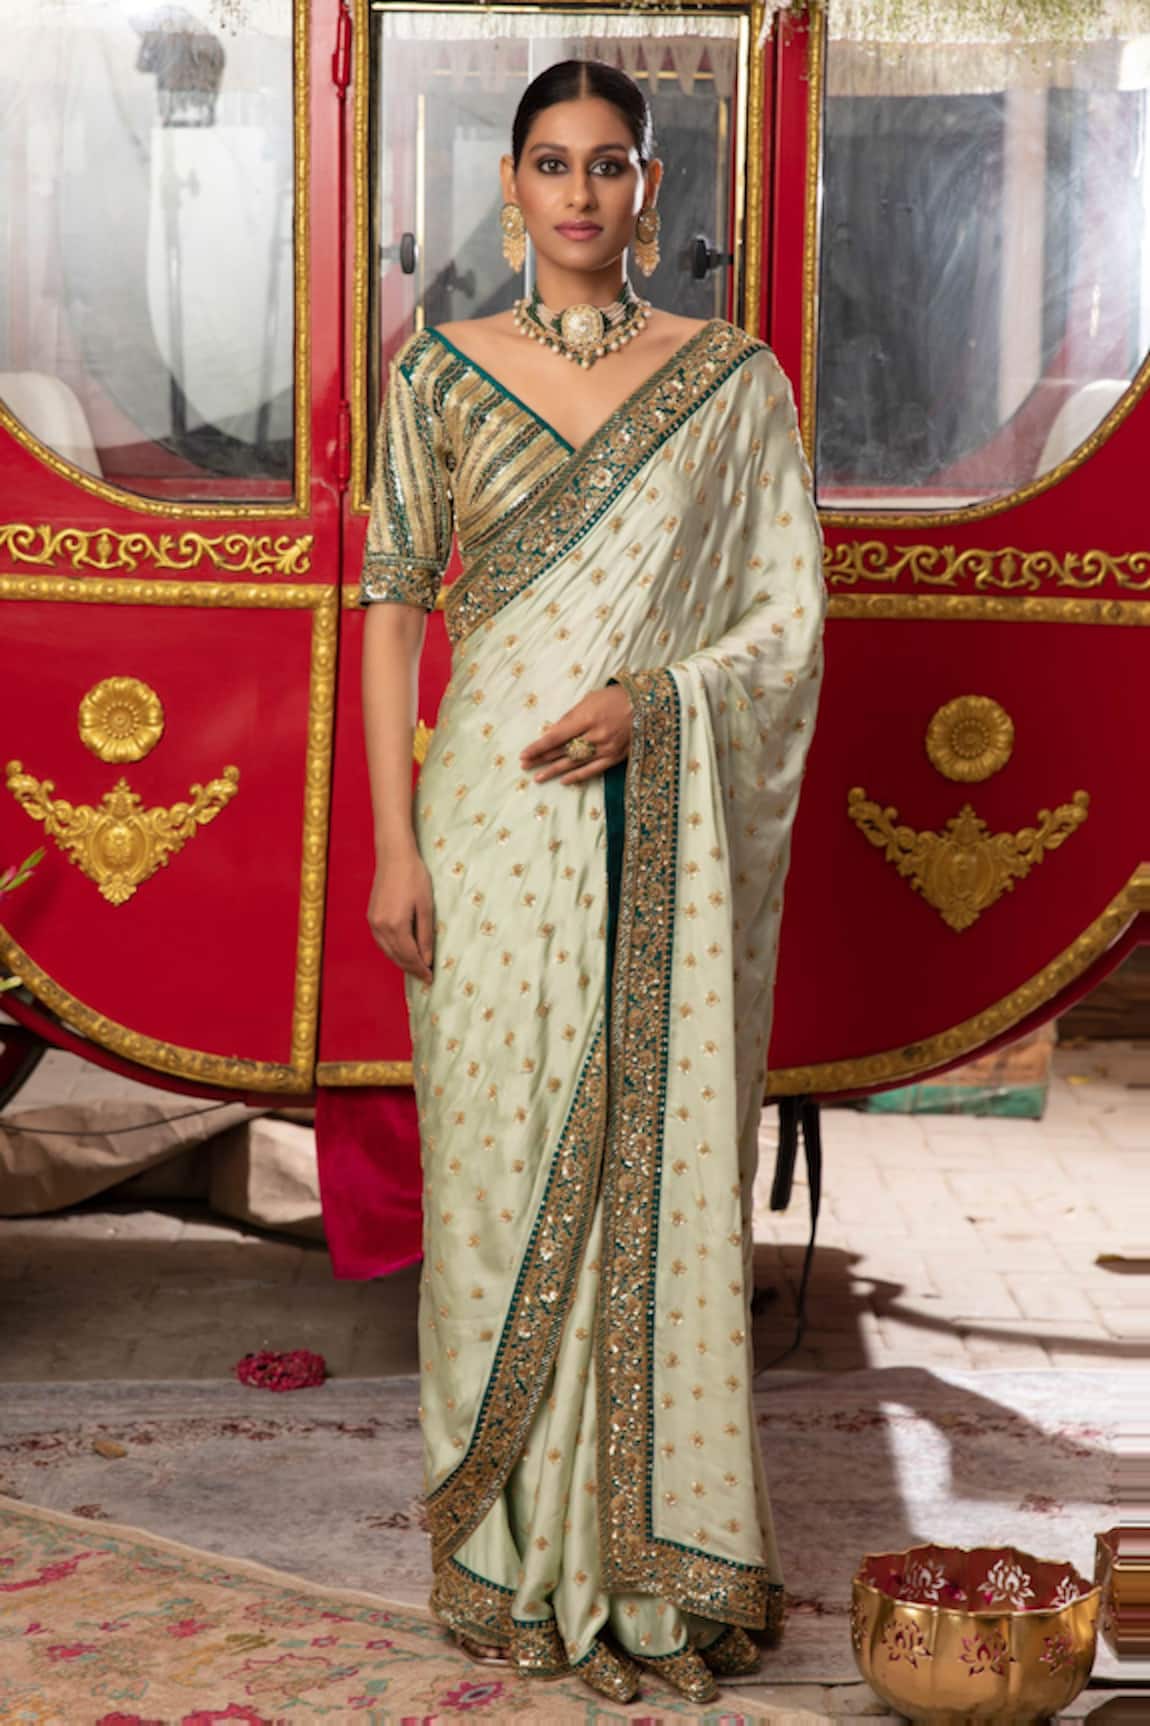 Buy Powder White Saree In Organza With Colorful Resham Flowers On The  Border Along With Moti And Cut Dana Accents Online - Kalki Fashion